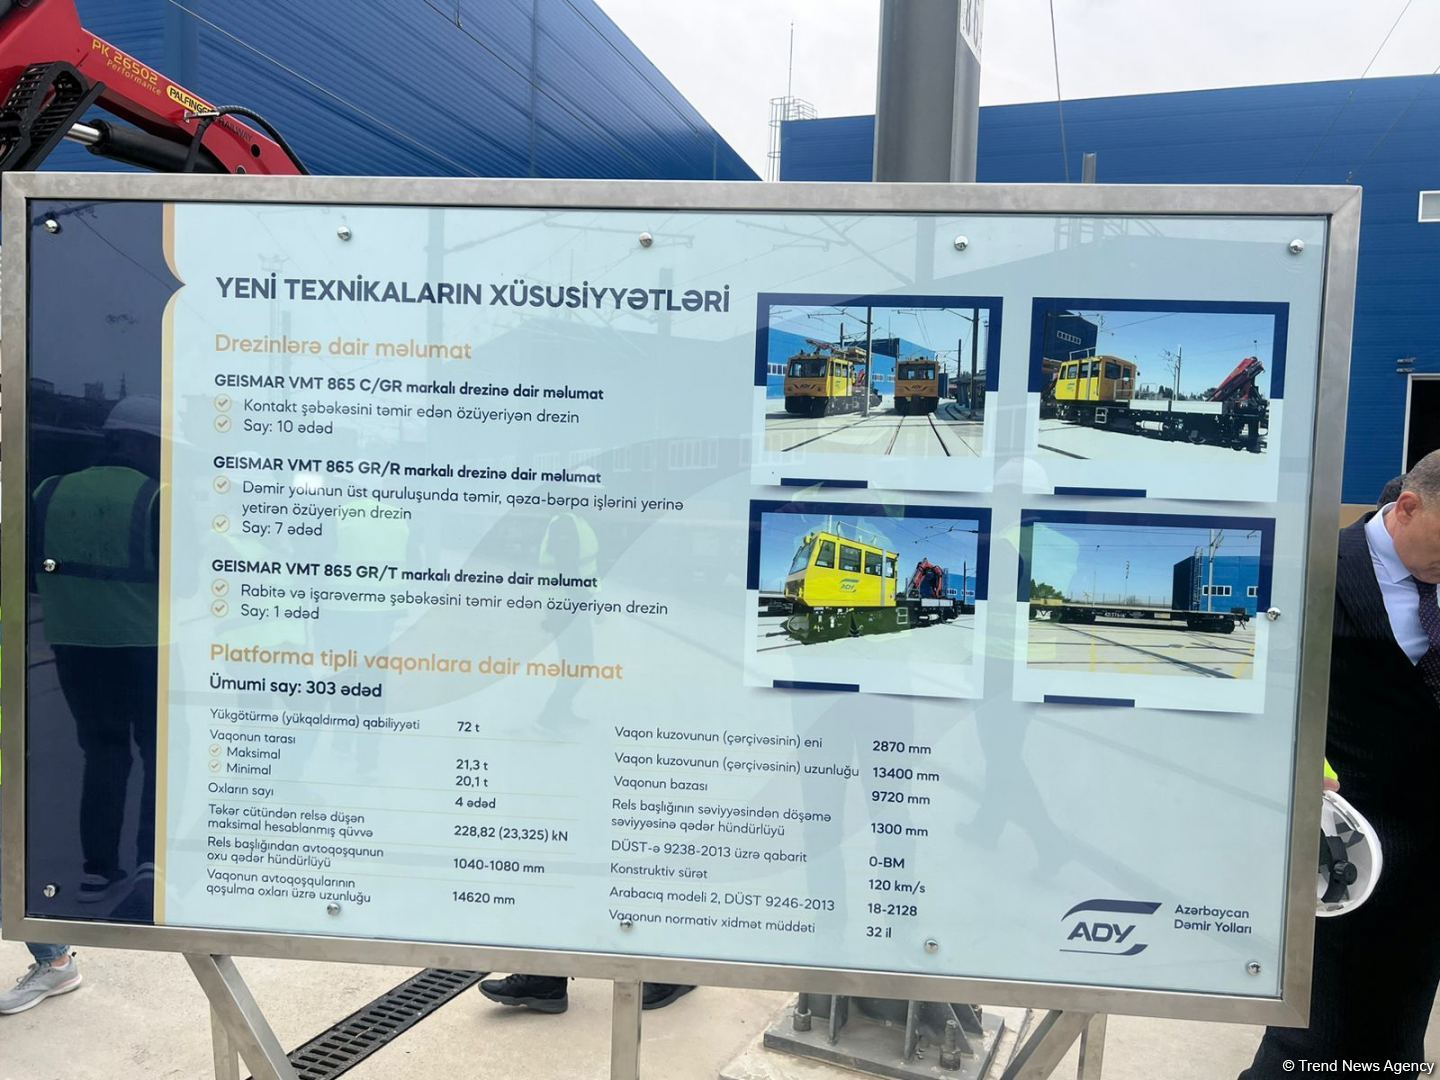 Azerbaijan Railways CJSC ensures purchase, delivery of new railcars to country (PHOTO)